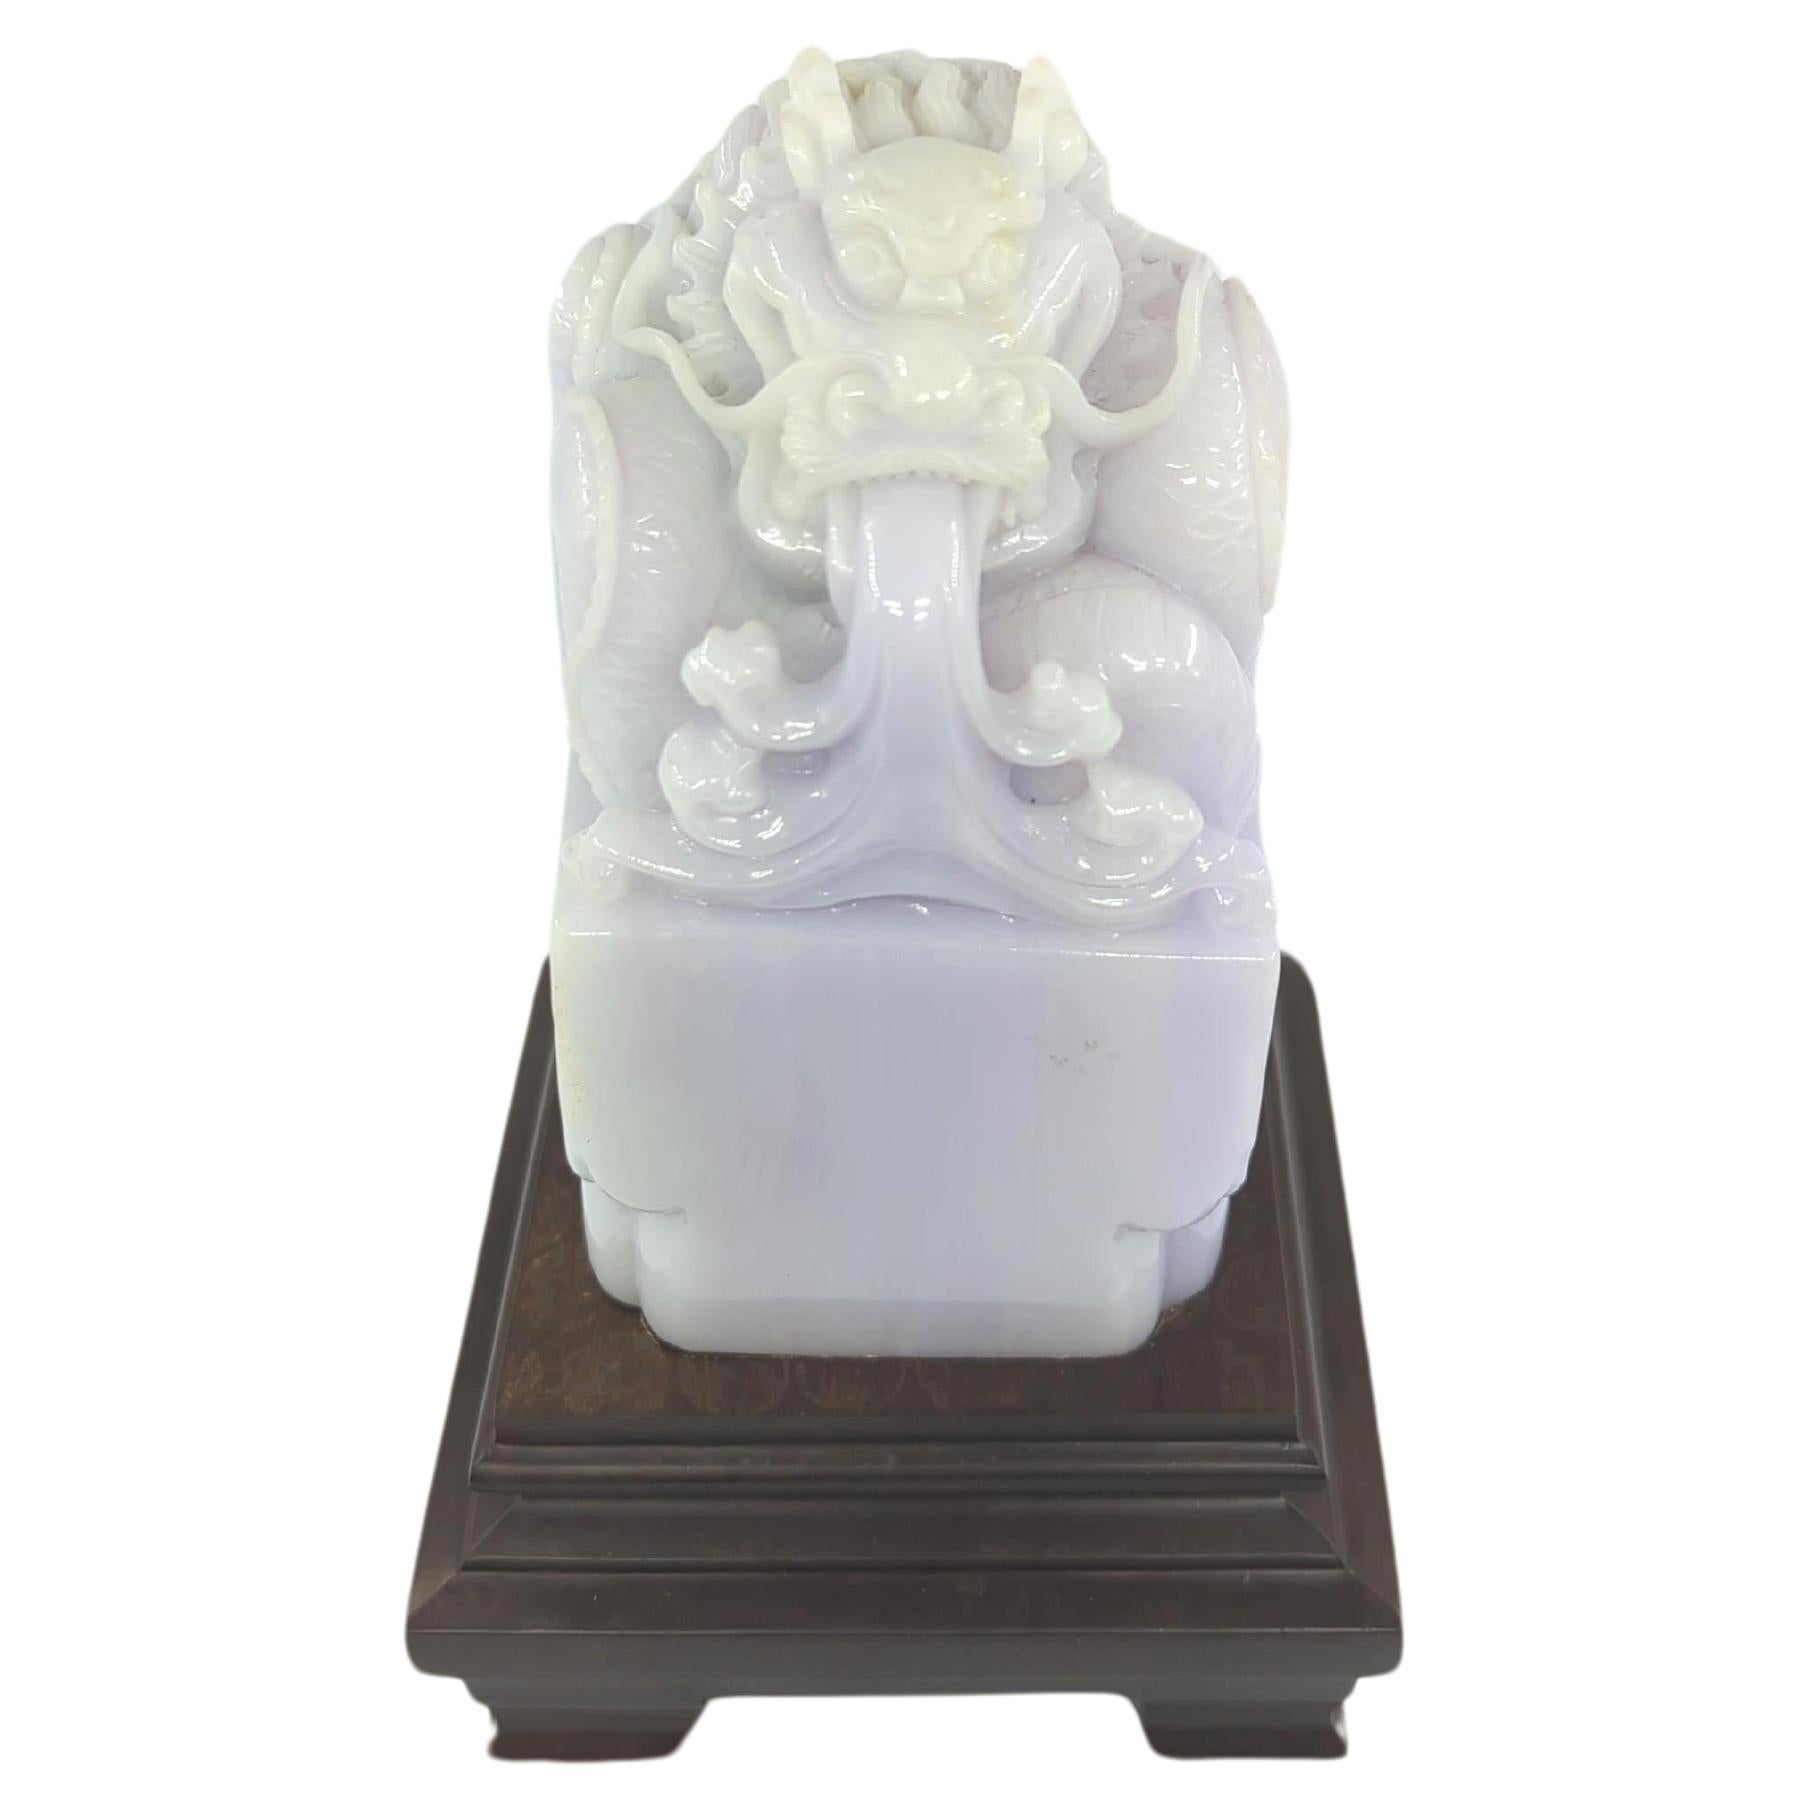 This large exquisite A-grade jadeite seal presents a masterful carving of a scaly dragon, rendered in a delicate shade of pale lavender. 

The dragon, a symbol of power, strength, and good luck, is intricately carved atop a square boulder, adding a